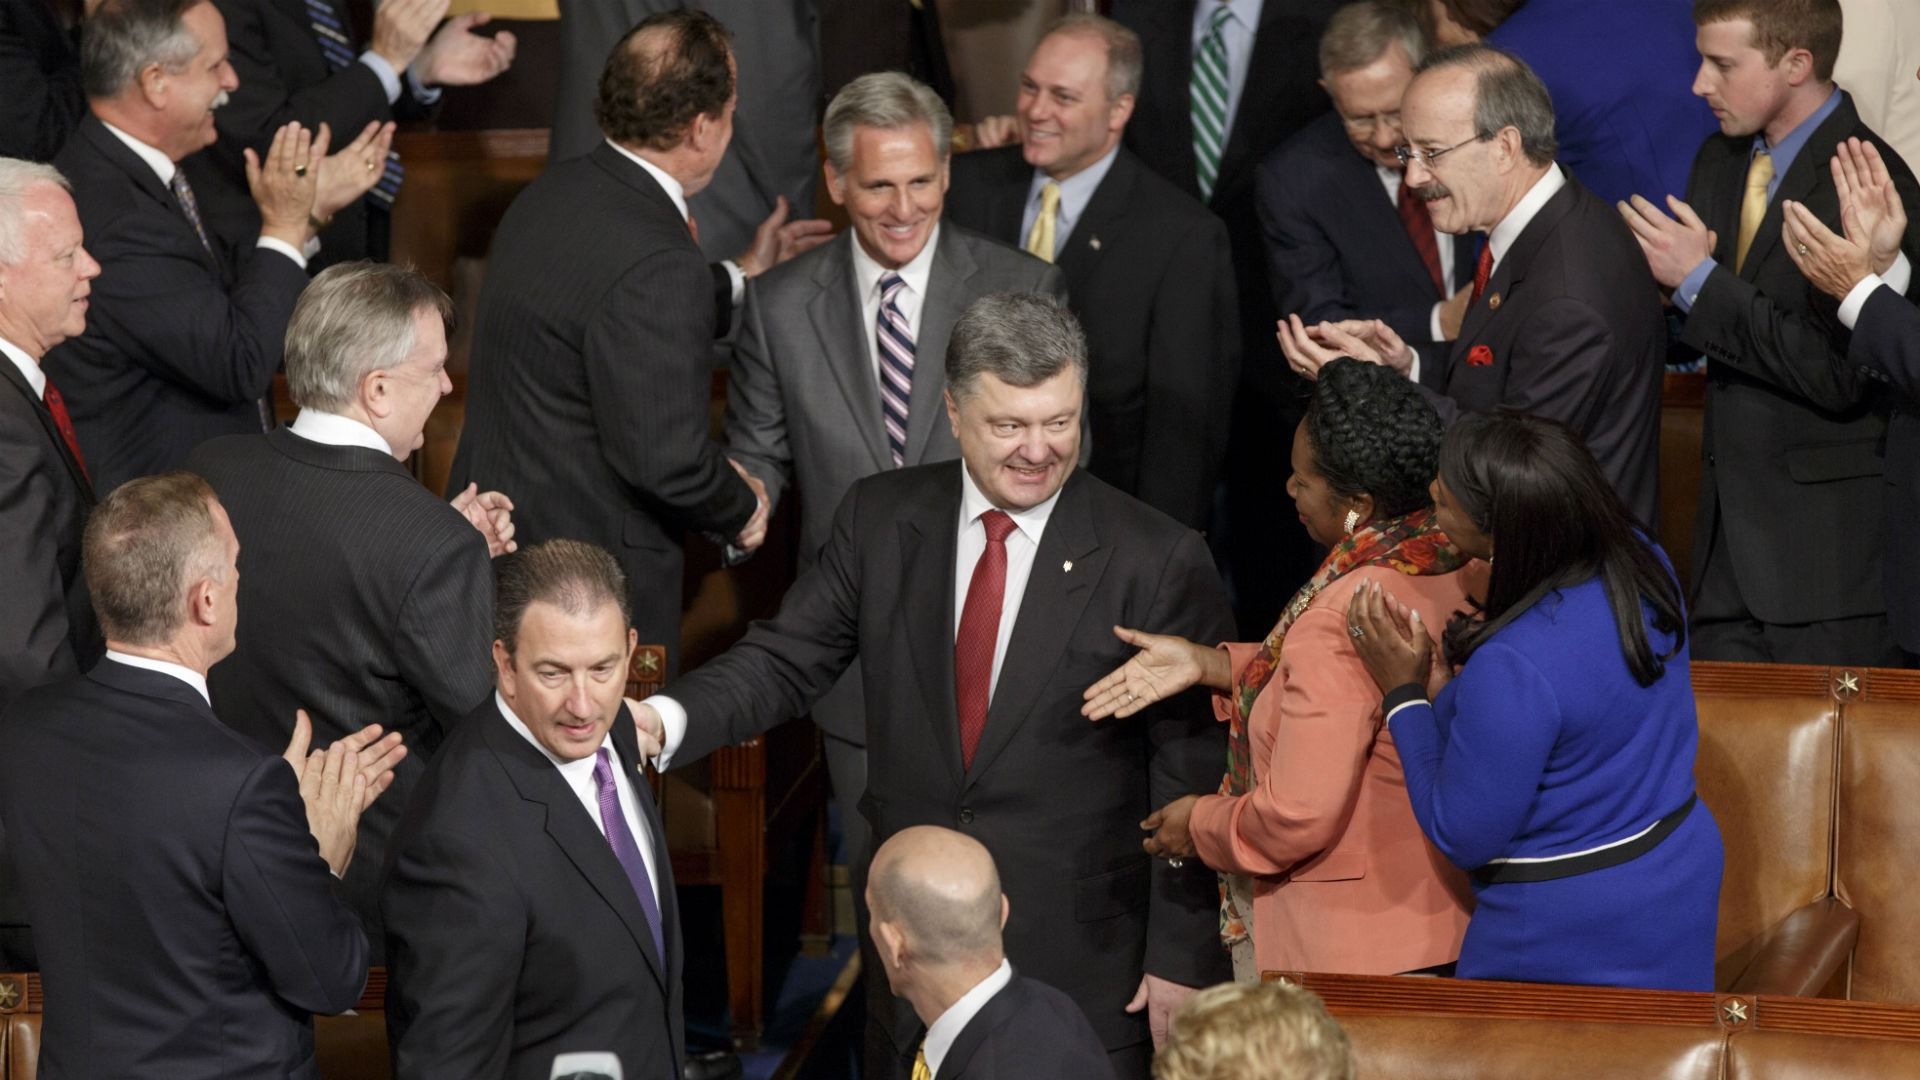 Ukrainian President Petro Poroshenko was welcomed by U.S. lawmakers as he arrived to address a joint session of Congress at the Capitol in Washington on Sept. 18.